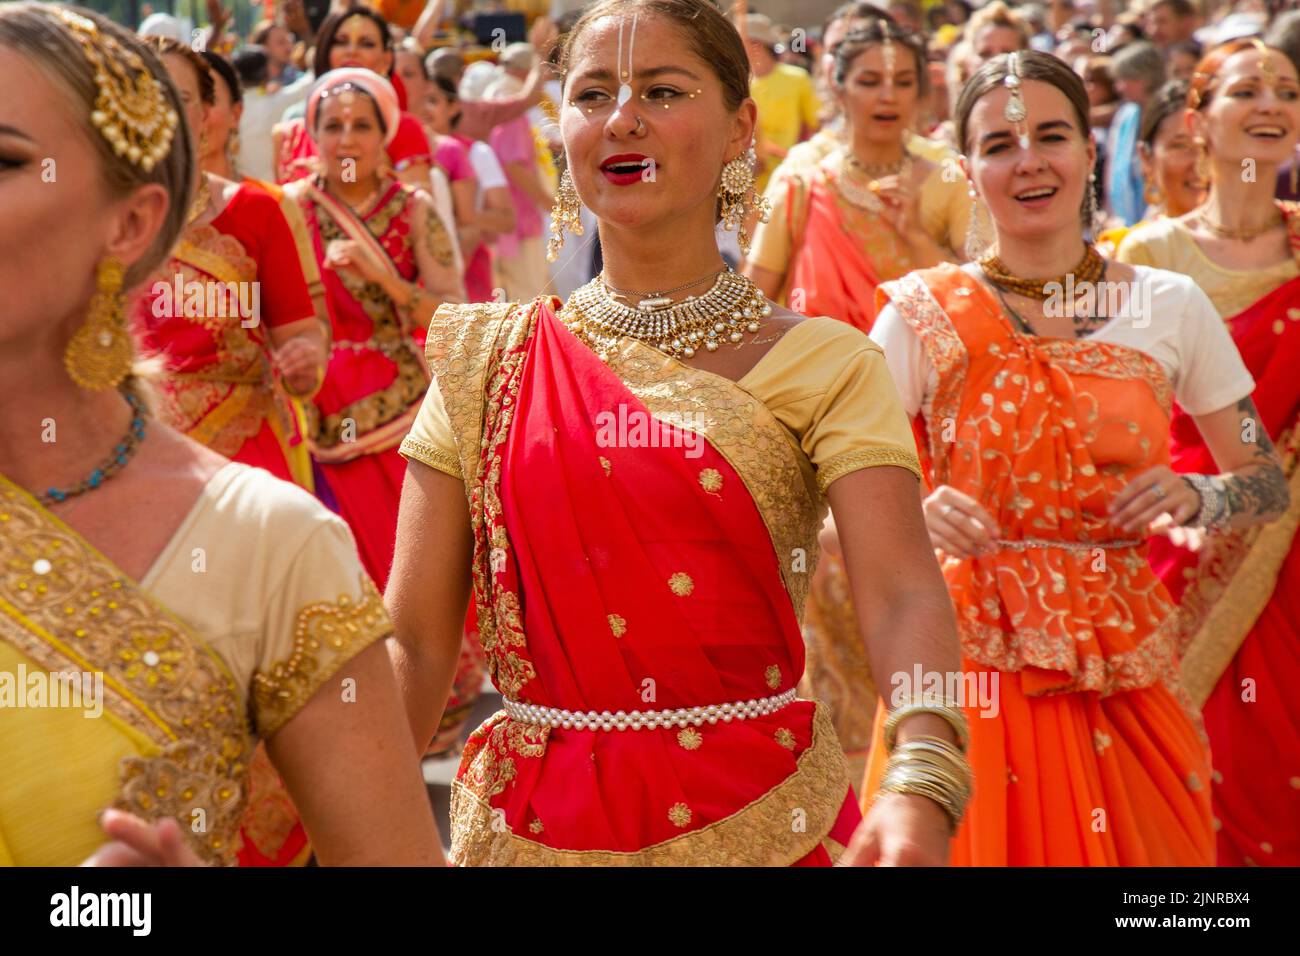 Moscow, Russia. 13th of August, 2022. Russian women in Indian national costumes sing 'Hare Krishna' and dance at the head of the procession of the Ratha Yatra parade, or the Hindu religious Chariot Festival, as part of the India Day festival taking place in Dream Island Park of Moscow, Russia Stock Photo